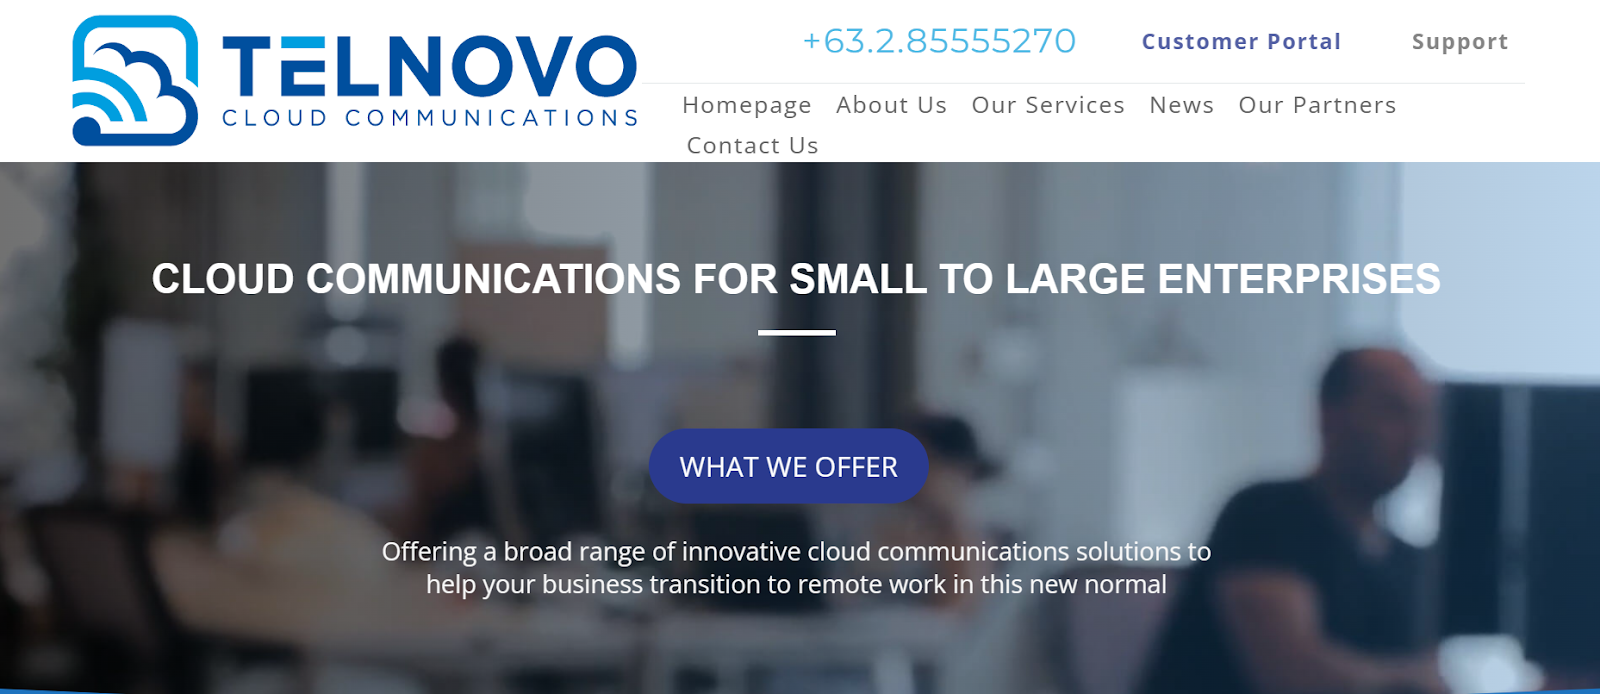 Telnovo website snapshot highlighting the services it offers.